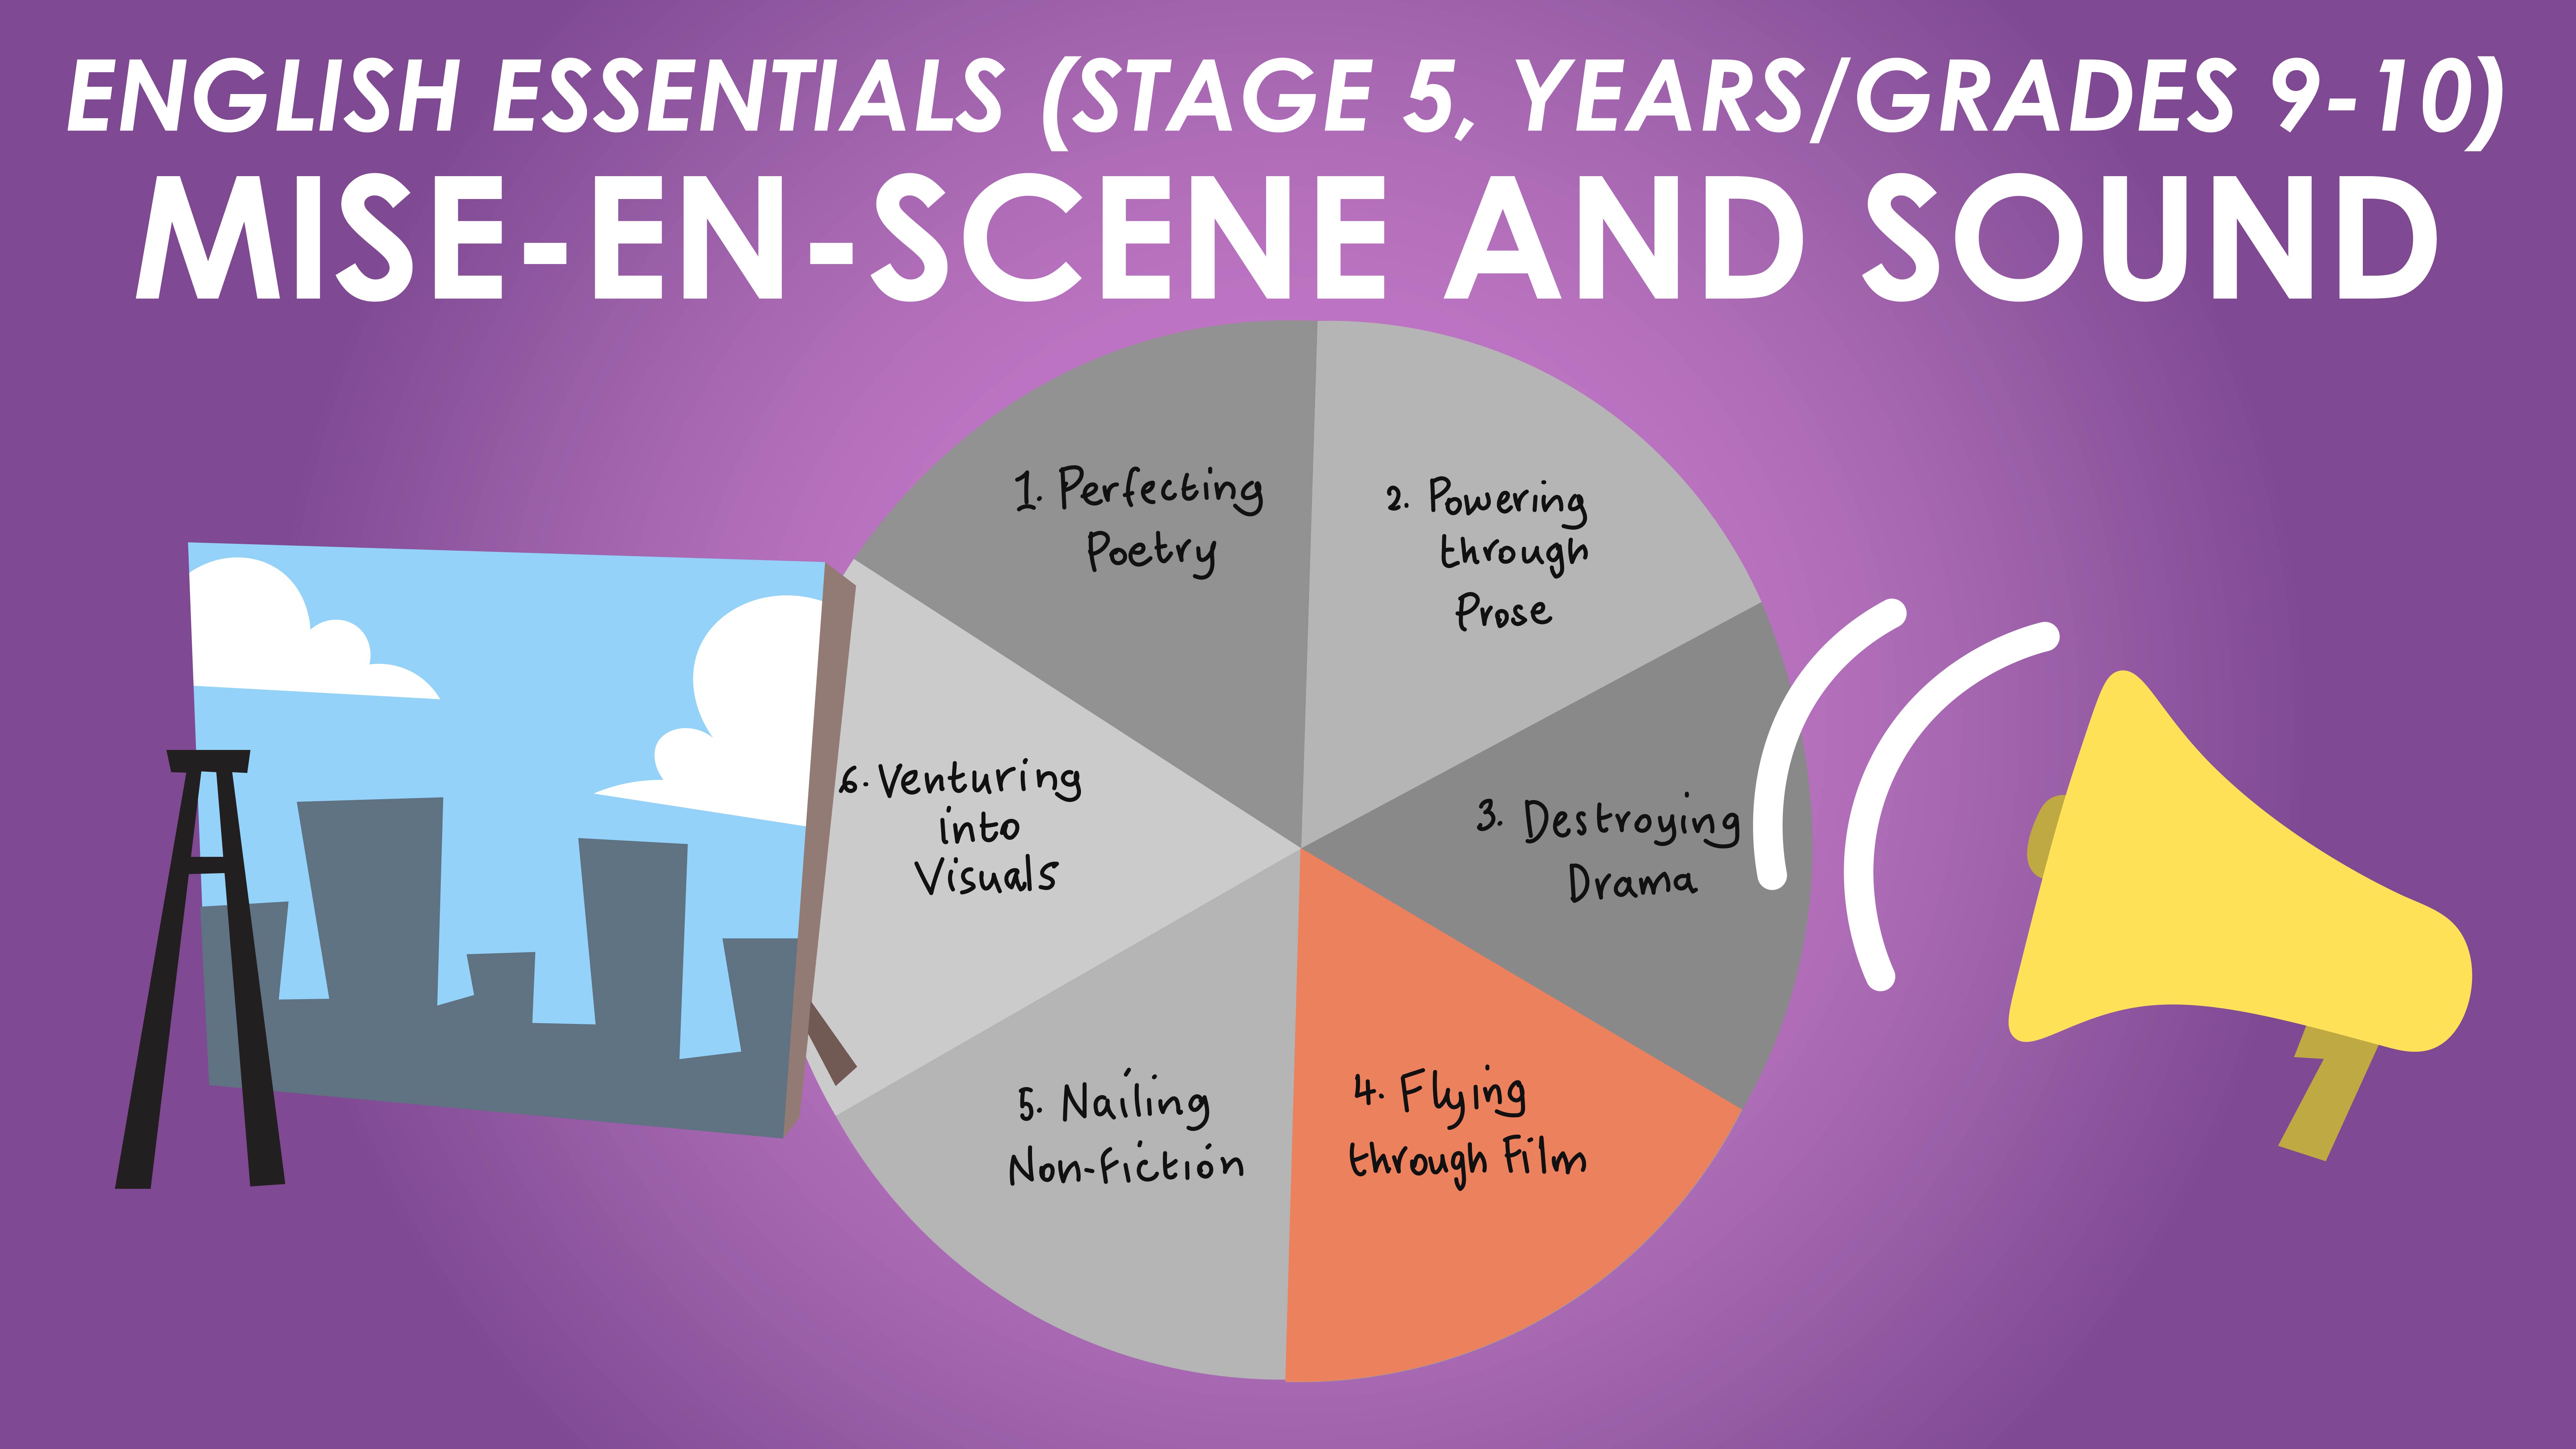 English Essentials - Flying Through Film - Mise-En-Scene and Sound (Stage 5, Years/Grades 9-10)